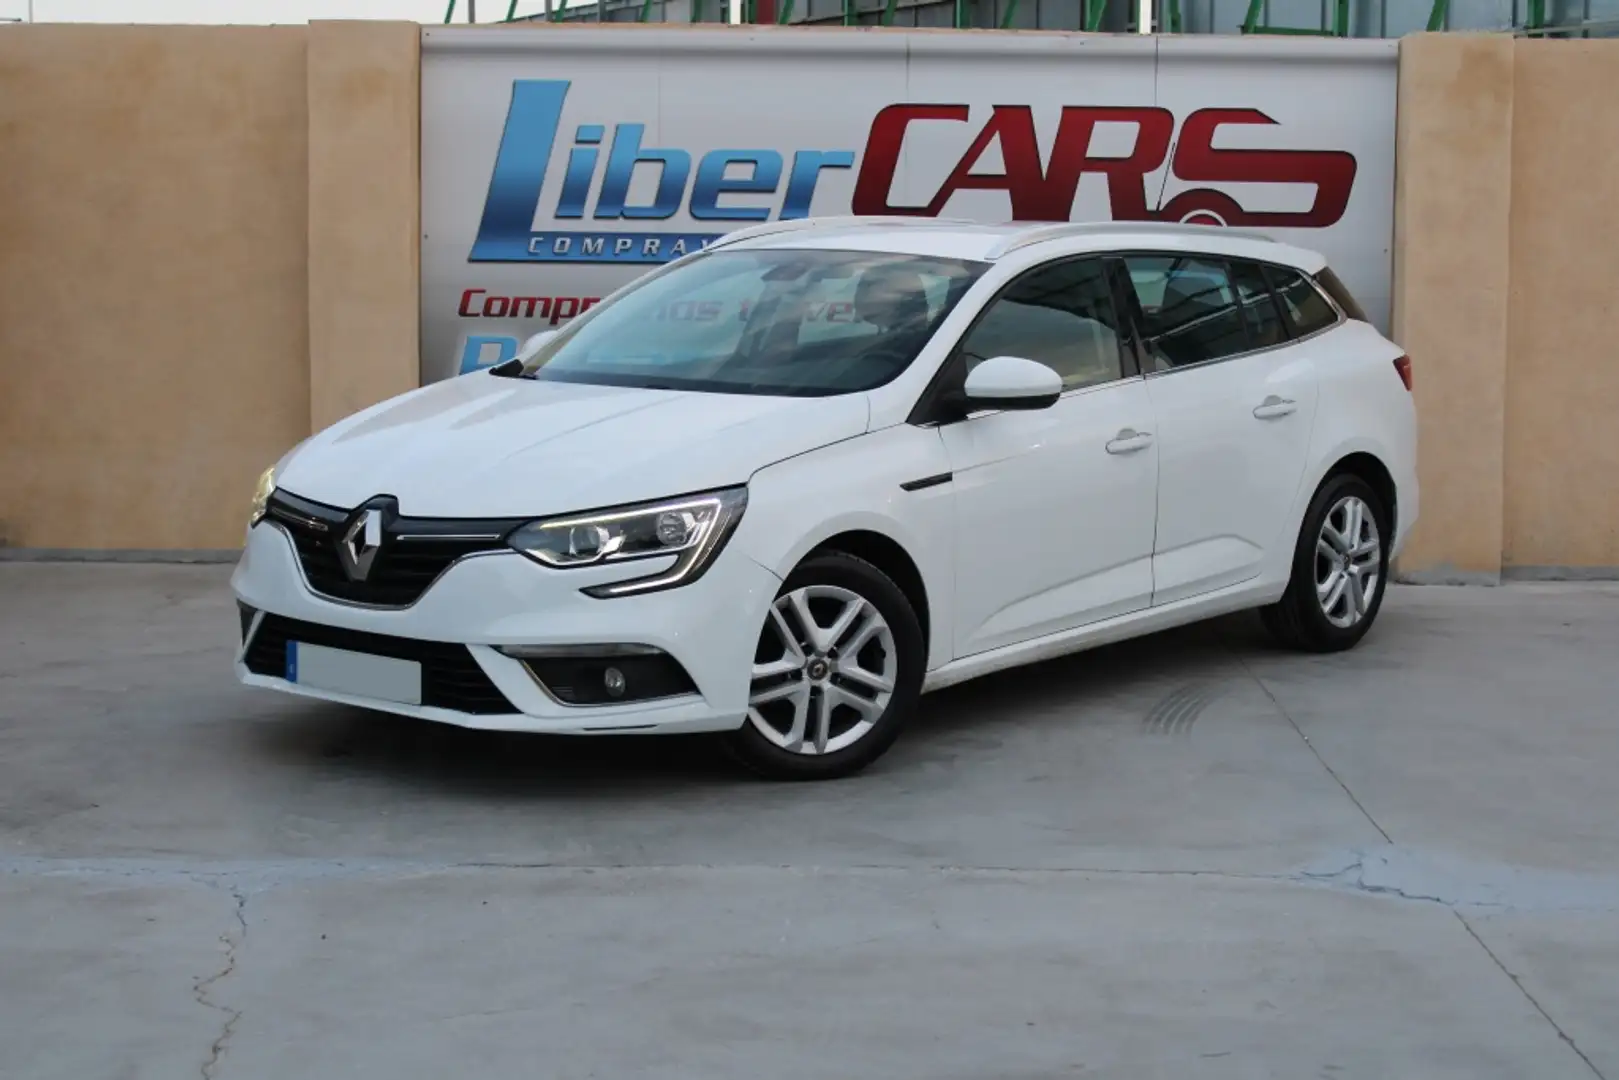 Renault Megane S.T. 1.5dCi Energy Business 81kW Blanc - 1